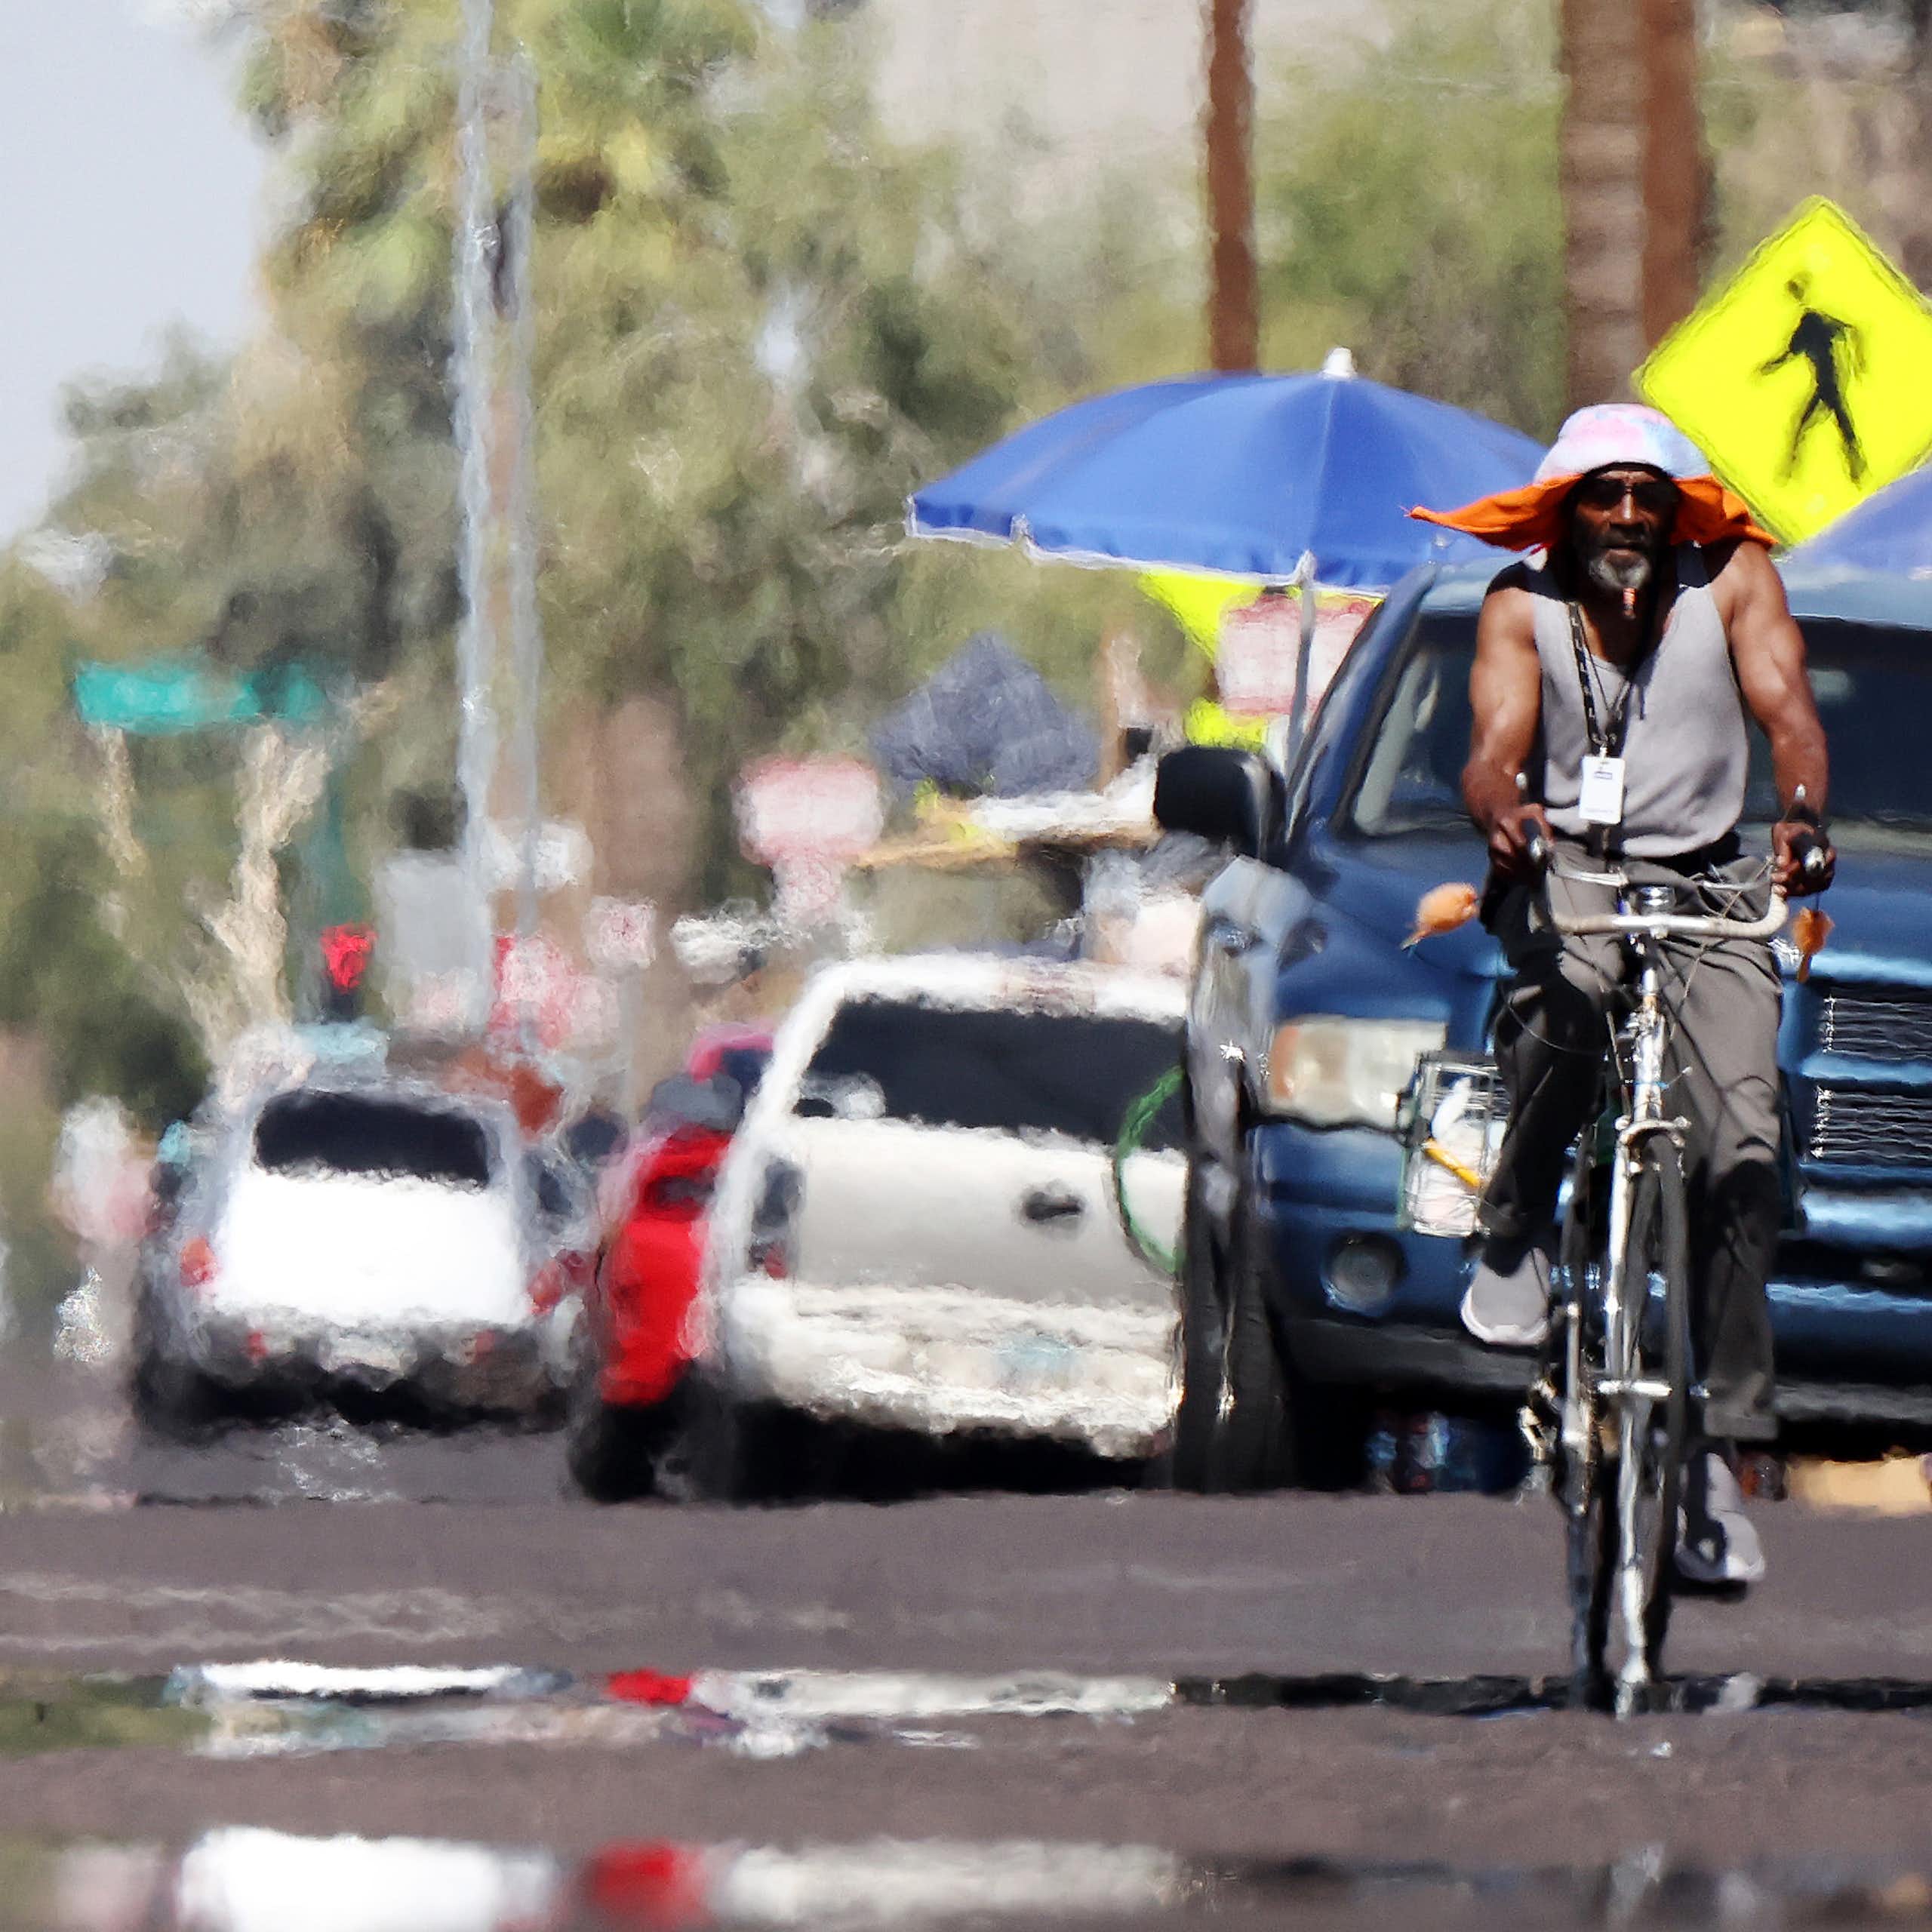 Heat index warnings can save lives on dangerously hot days − if people understand what they mean